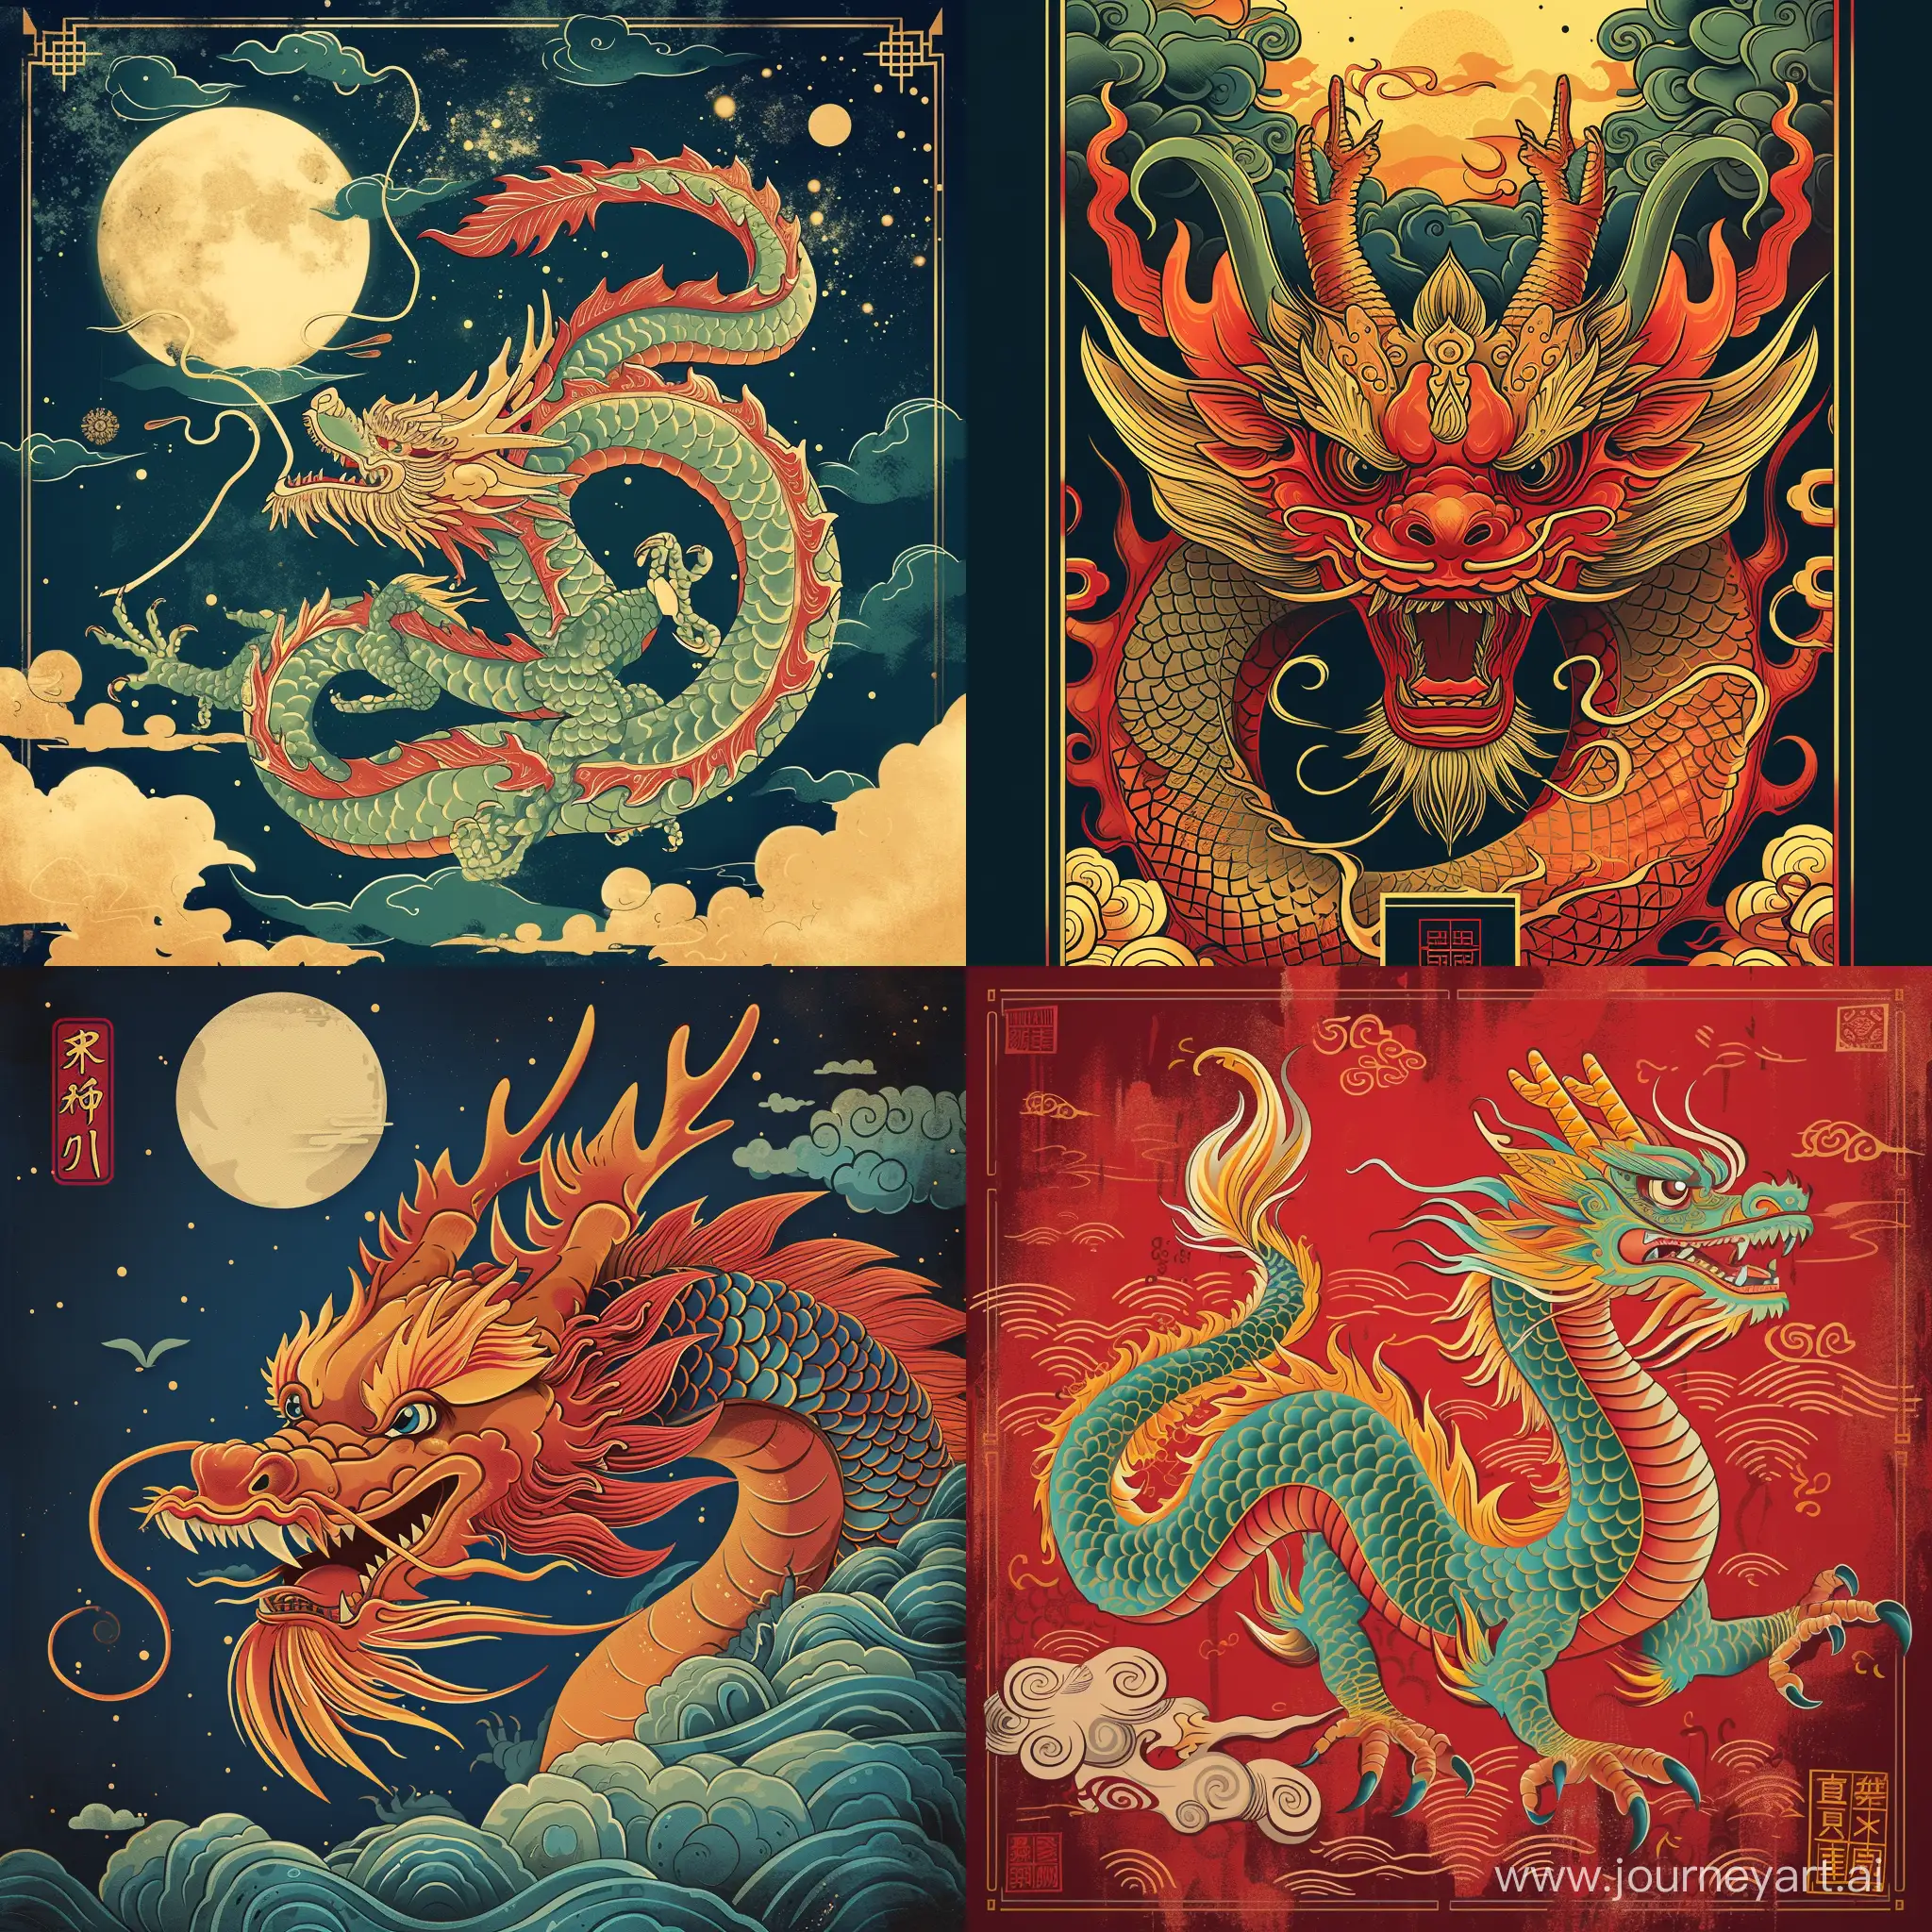 Year-of-the-Dragon-Themed-Poster-with-Vibrant-Colors-and-Intricate-Art-Version-6